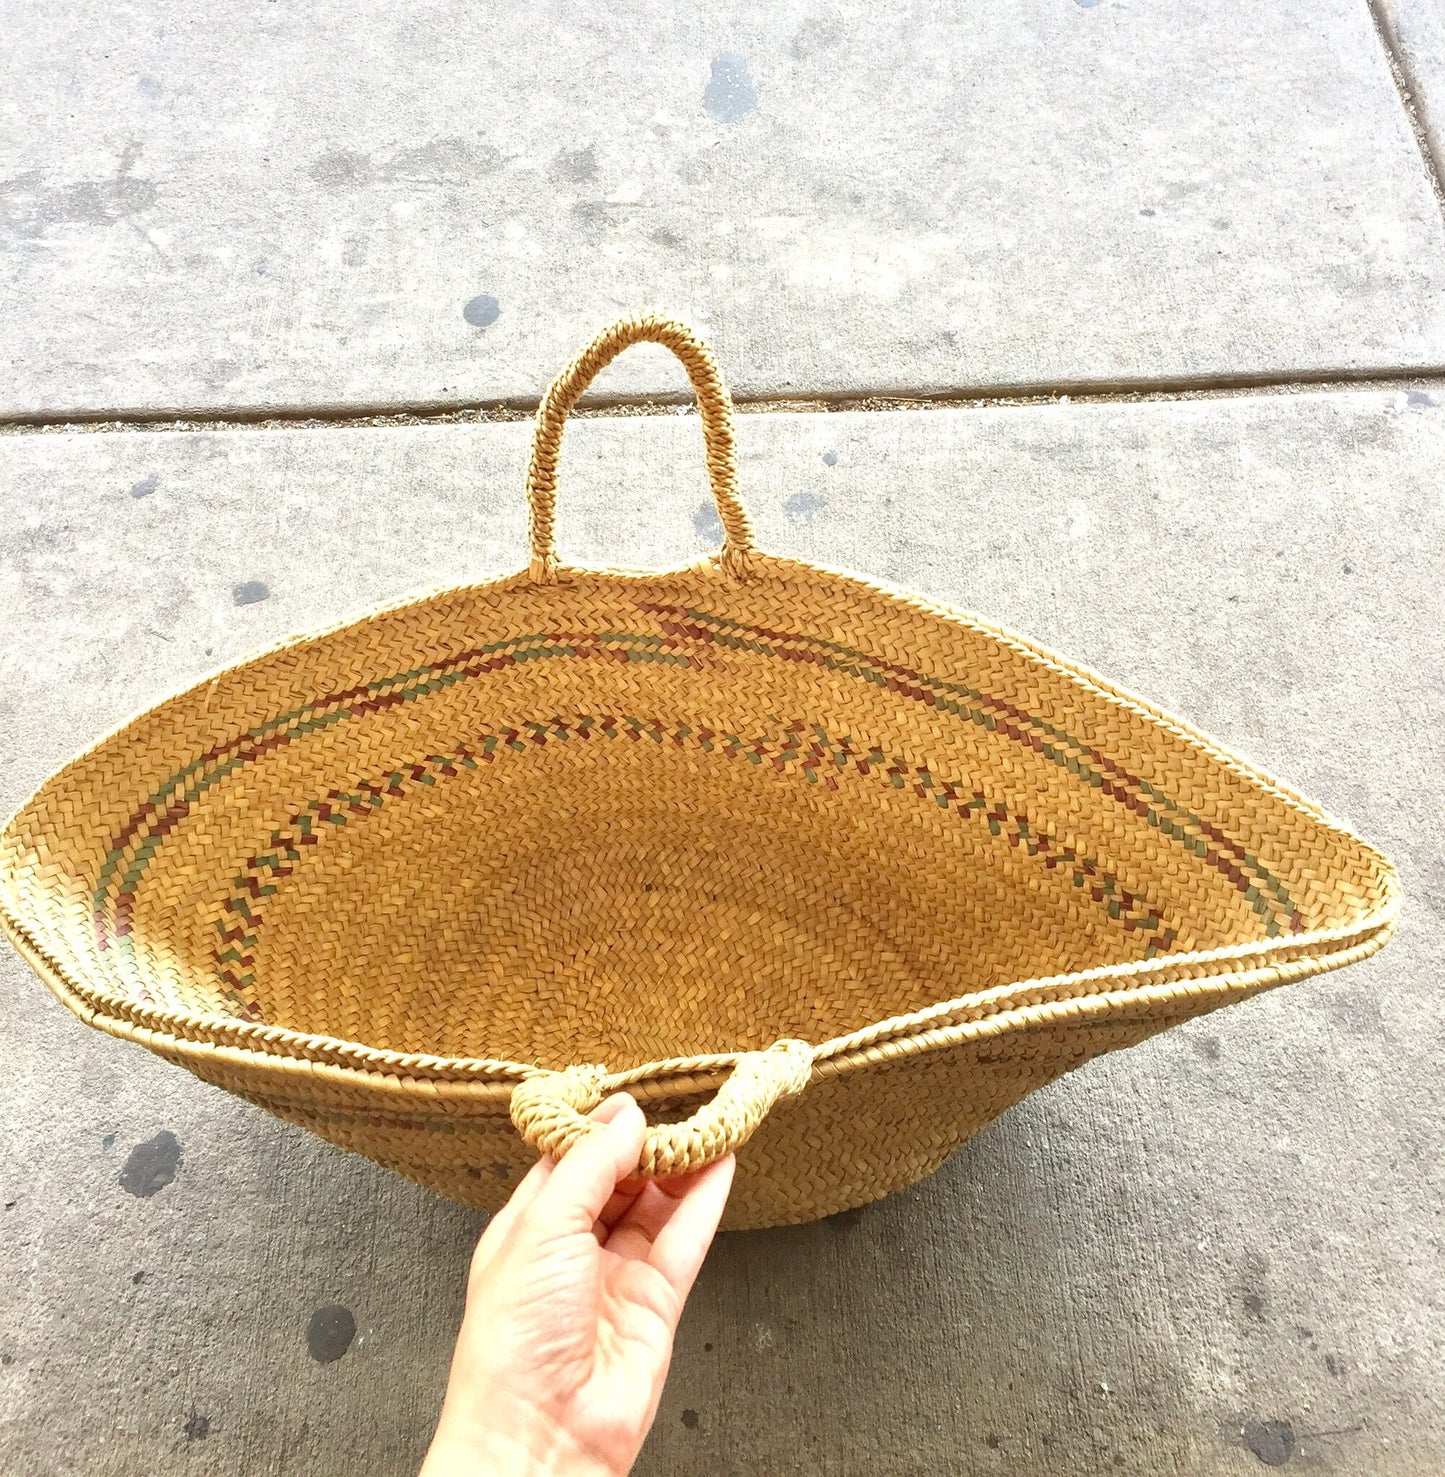 Hand holding a large handwoven straw tote bag with handles against a concrete background, boho style beach or shopping bag